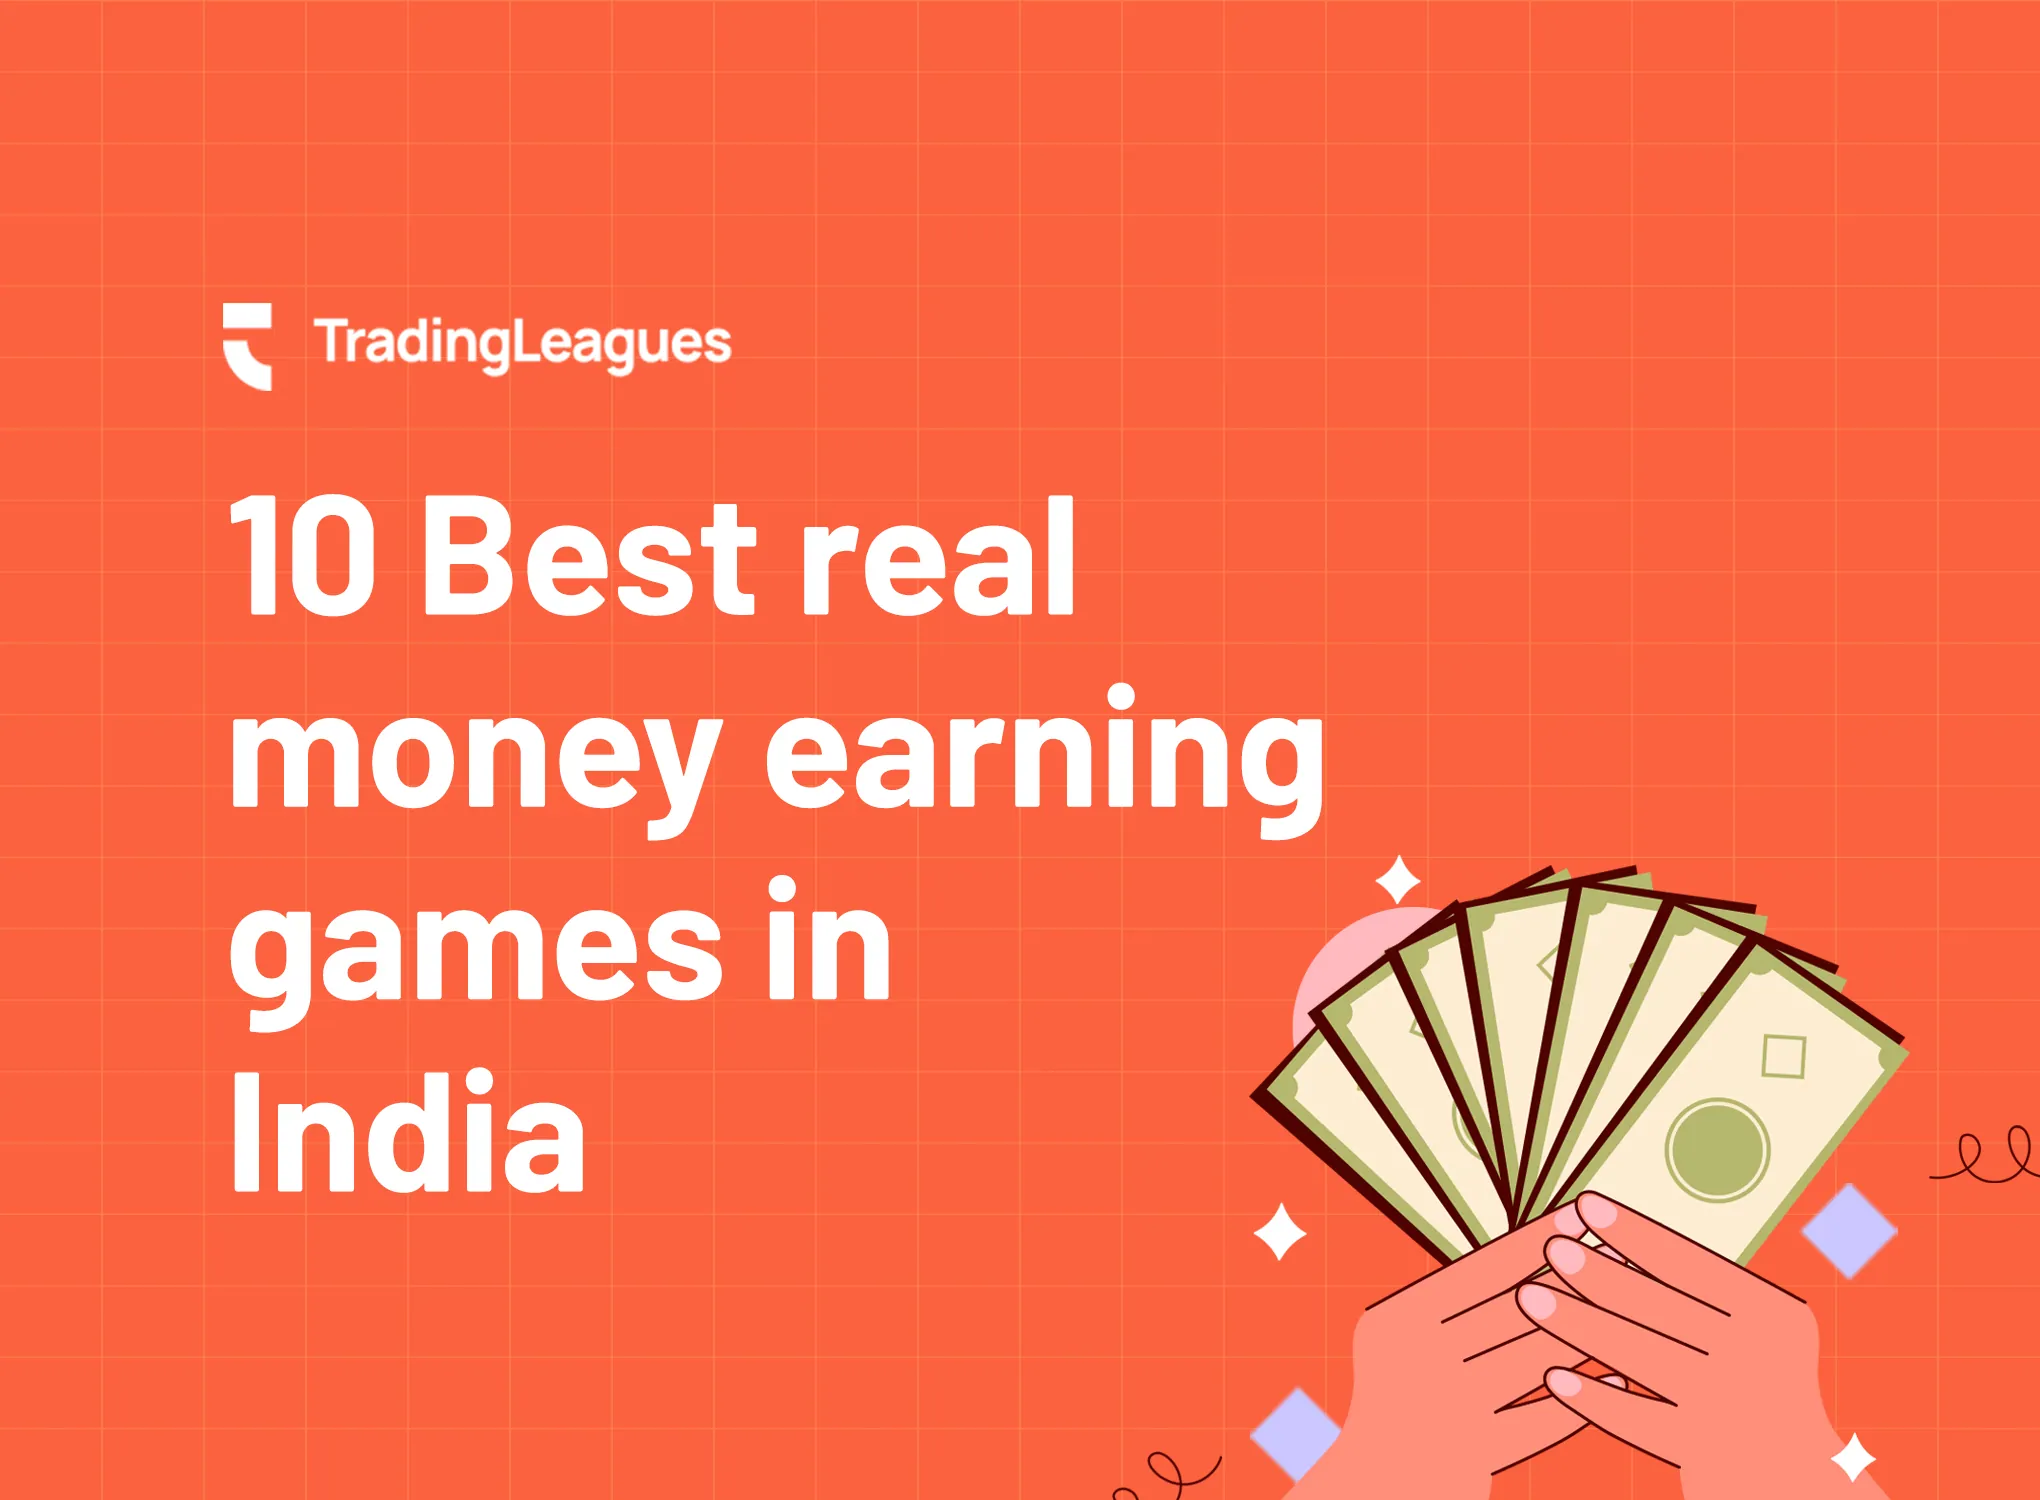 Best Indian Gaming Apps to Earn Money: Made in India Gaming Apps